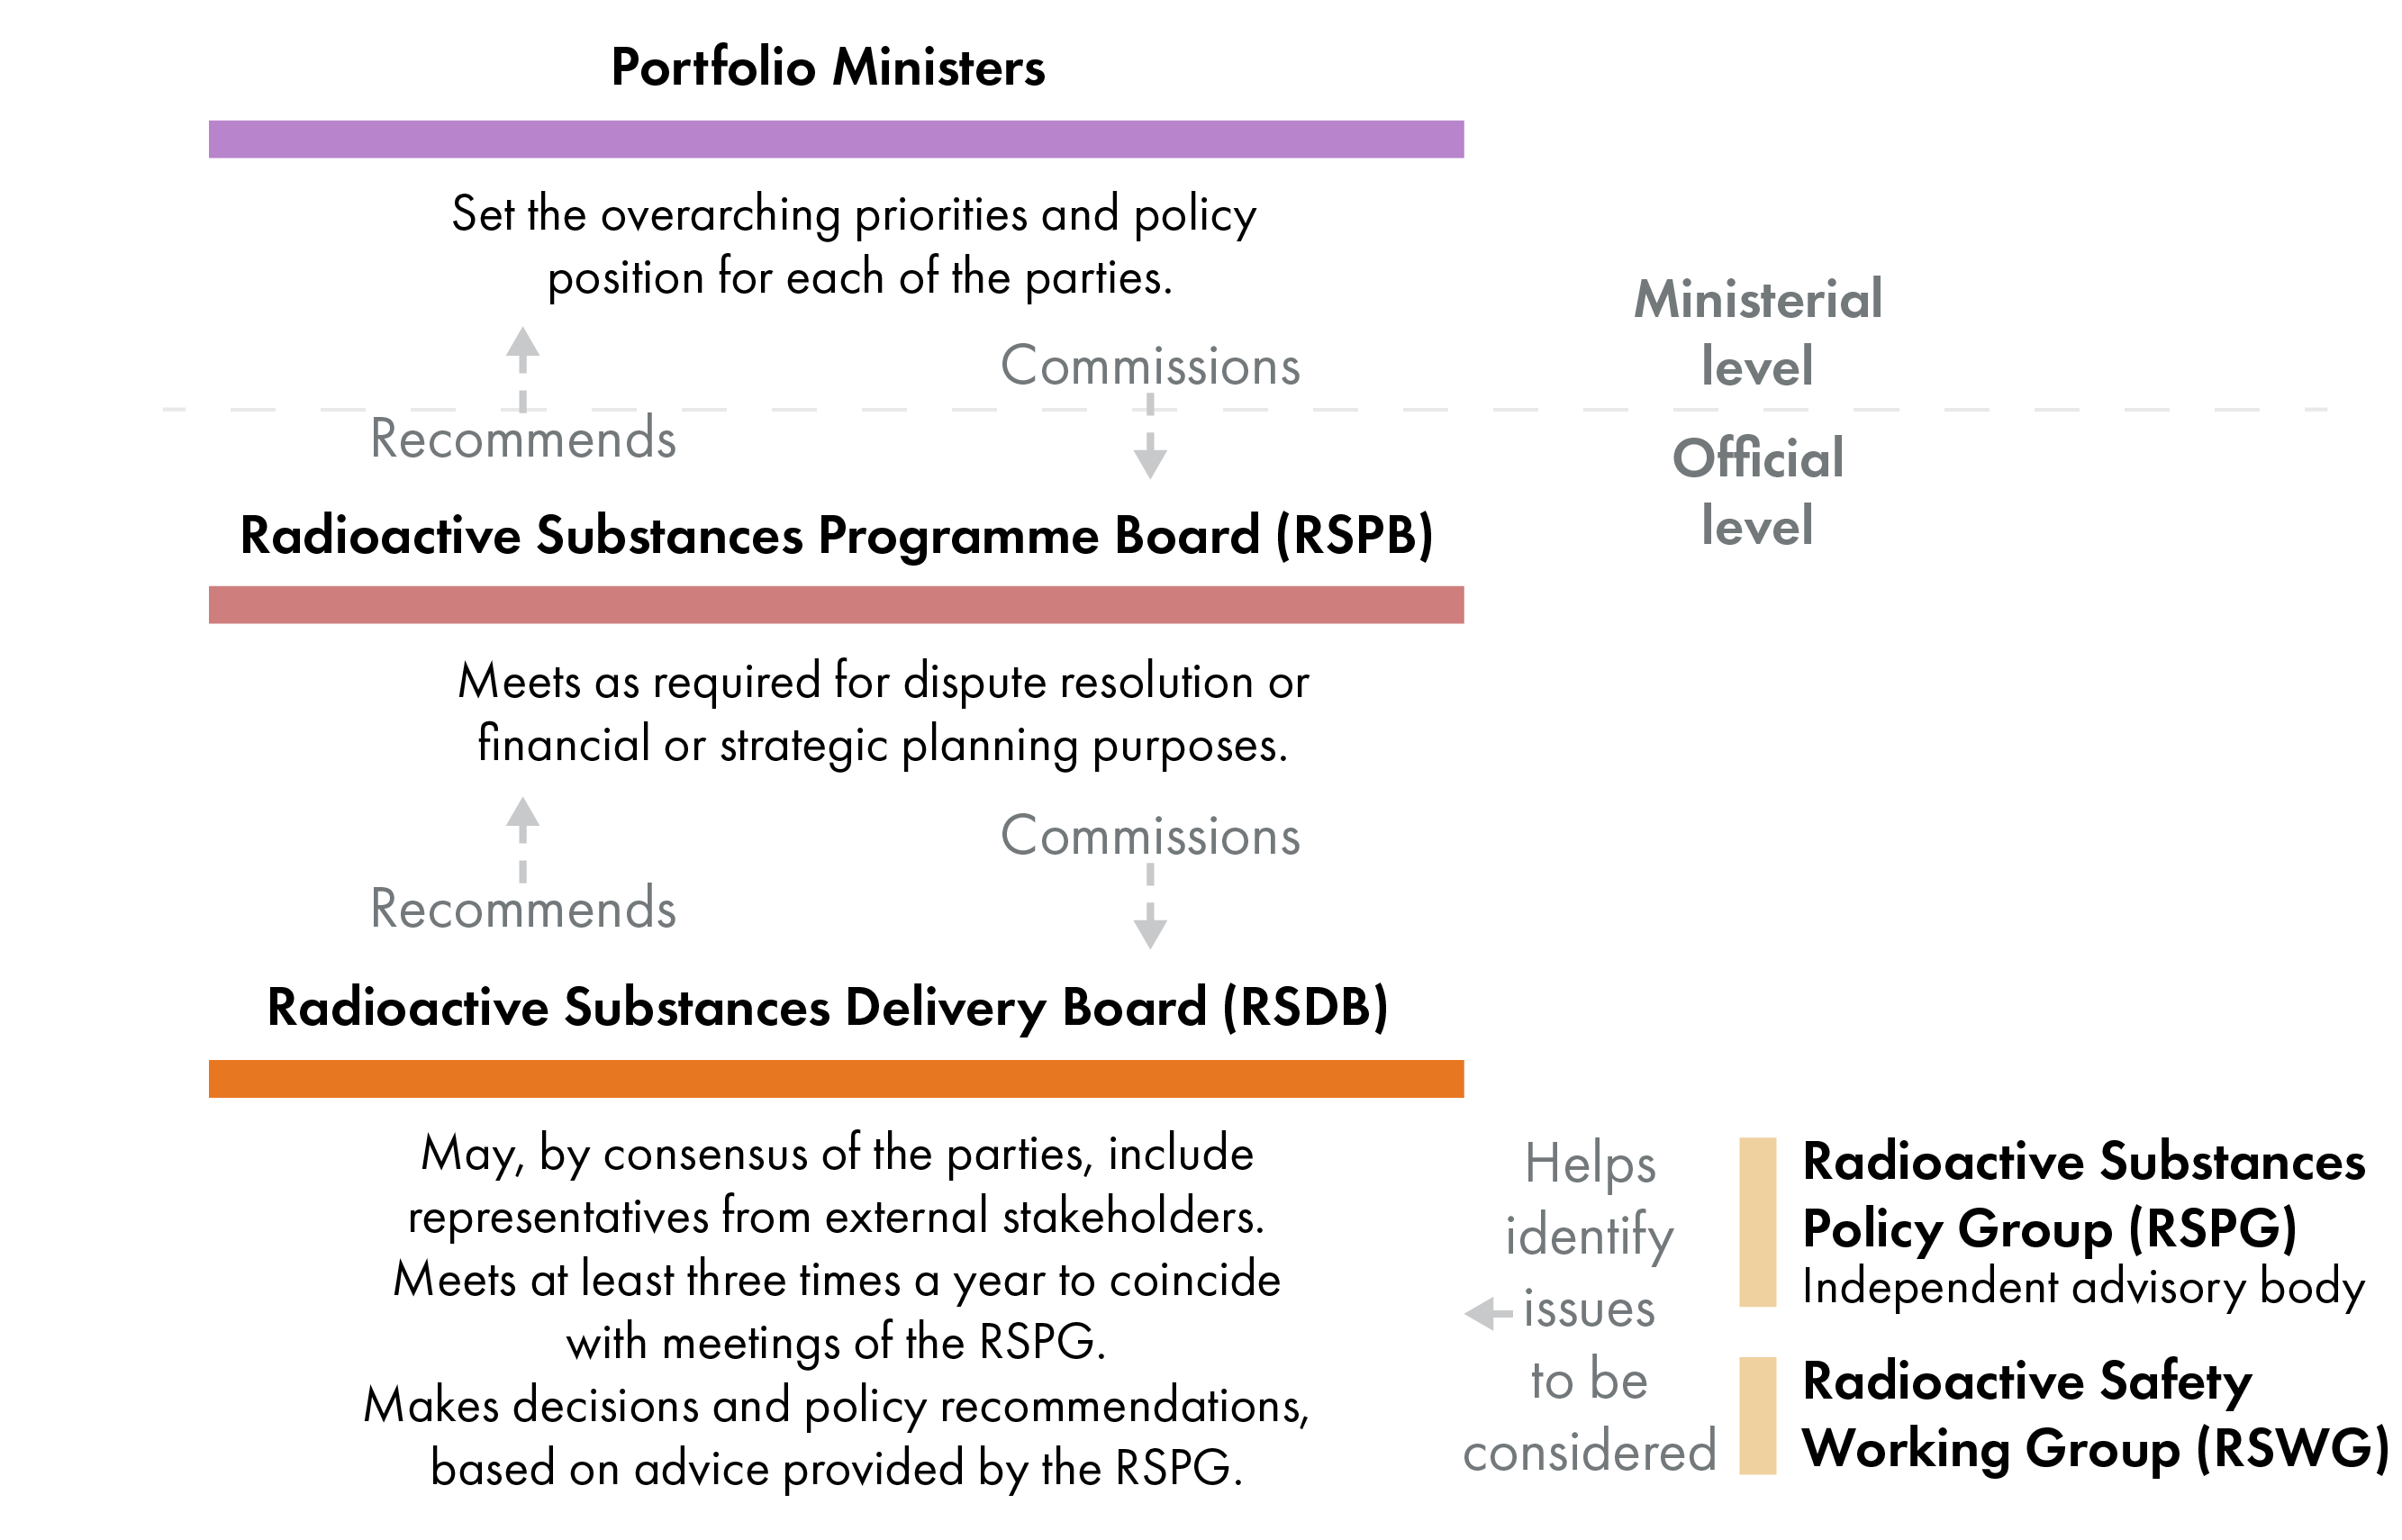 The diagram shows the governance structure within the Radioactive Substances Common Framework.